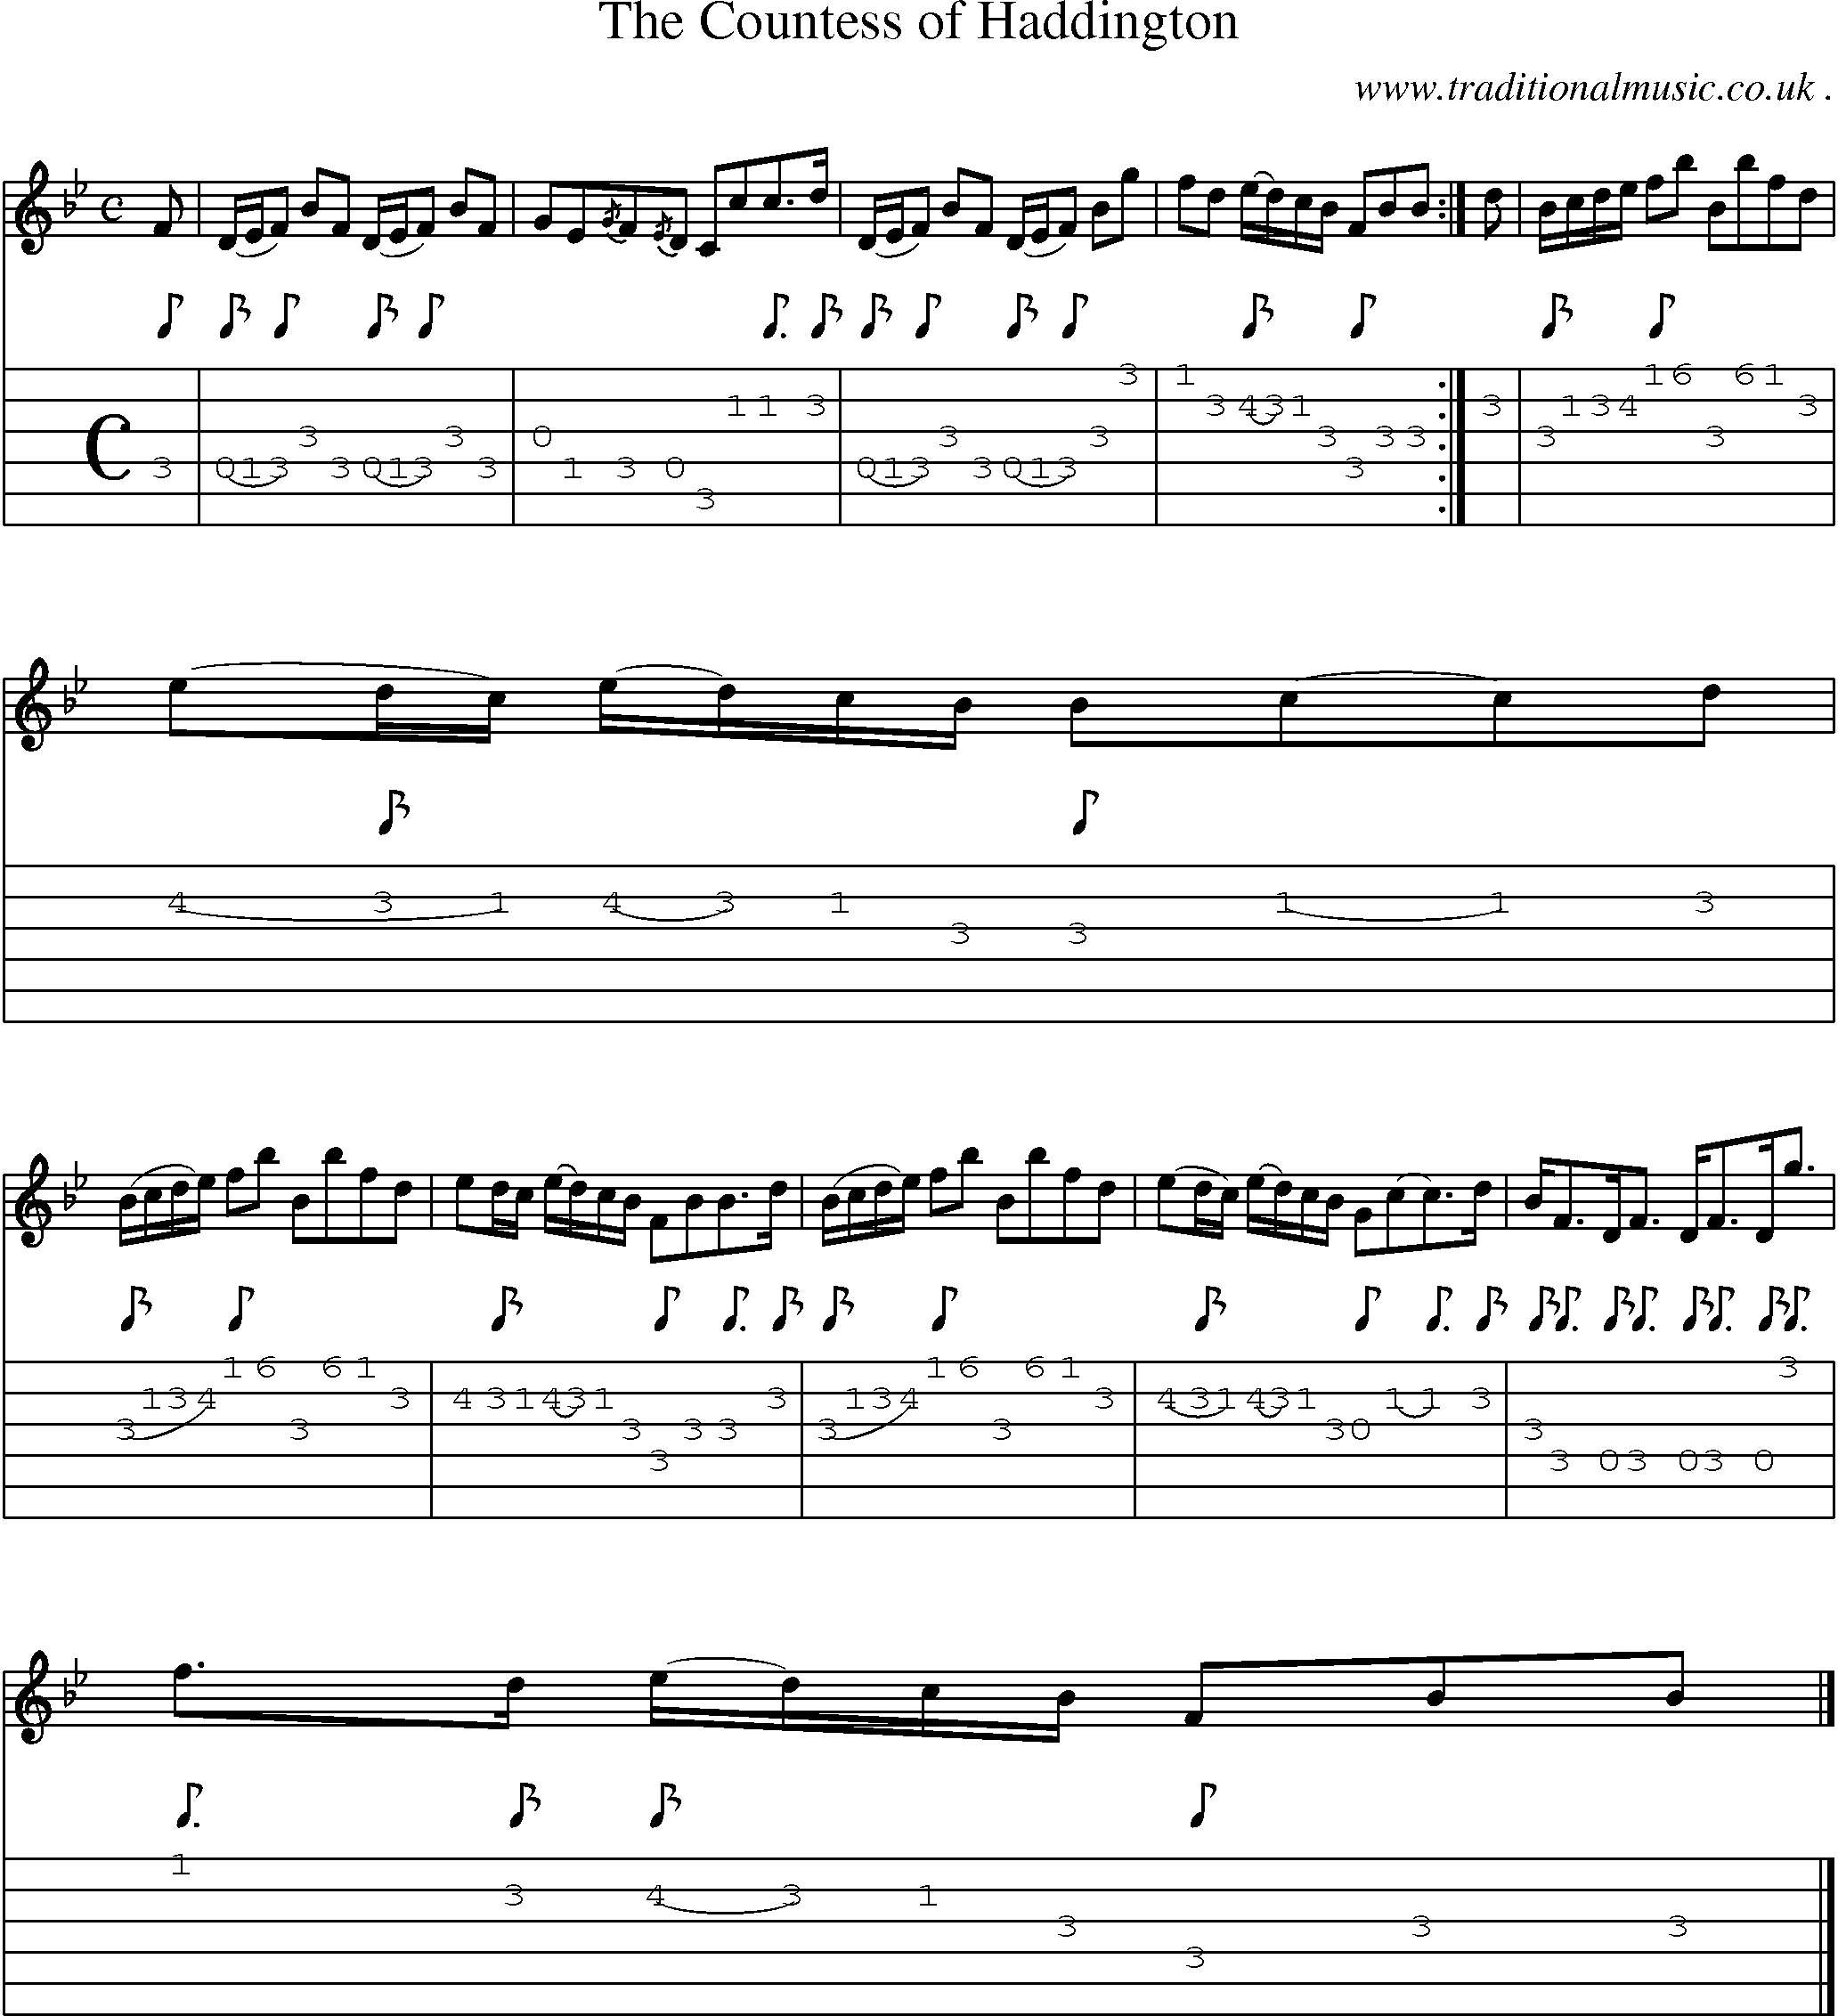 Sheet-music  score, Chords and Guitar Tabs for The Countess Of Haddington